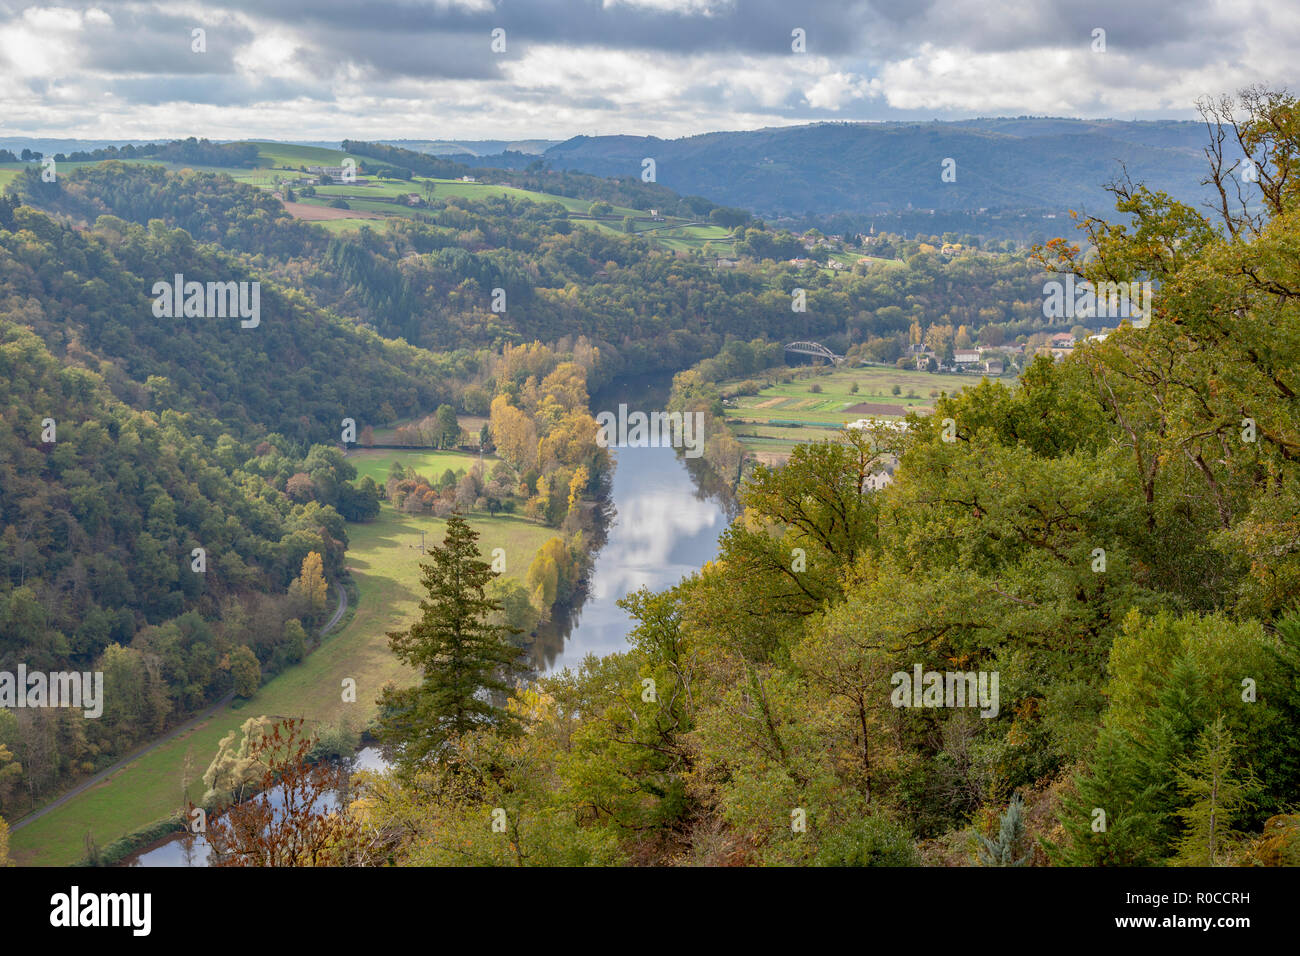 The valley of the Lot river, in Autumn (France). Near the 'Port d'Agrès', the Lot -  tributary of the Garonne river - flows peacefully towards West. Stock Photo